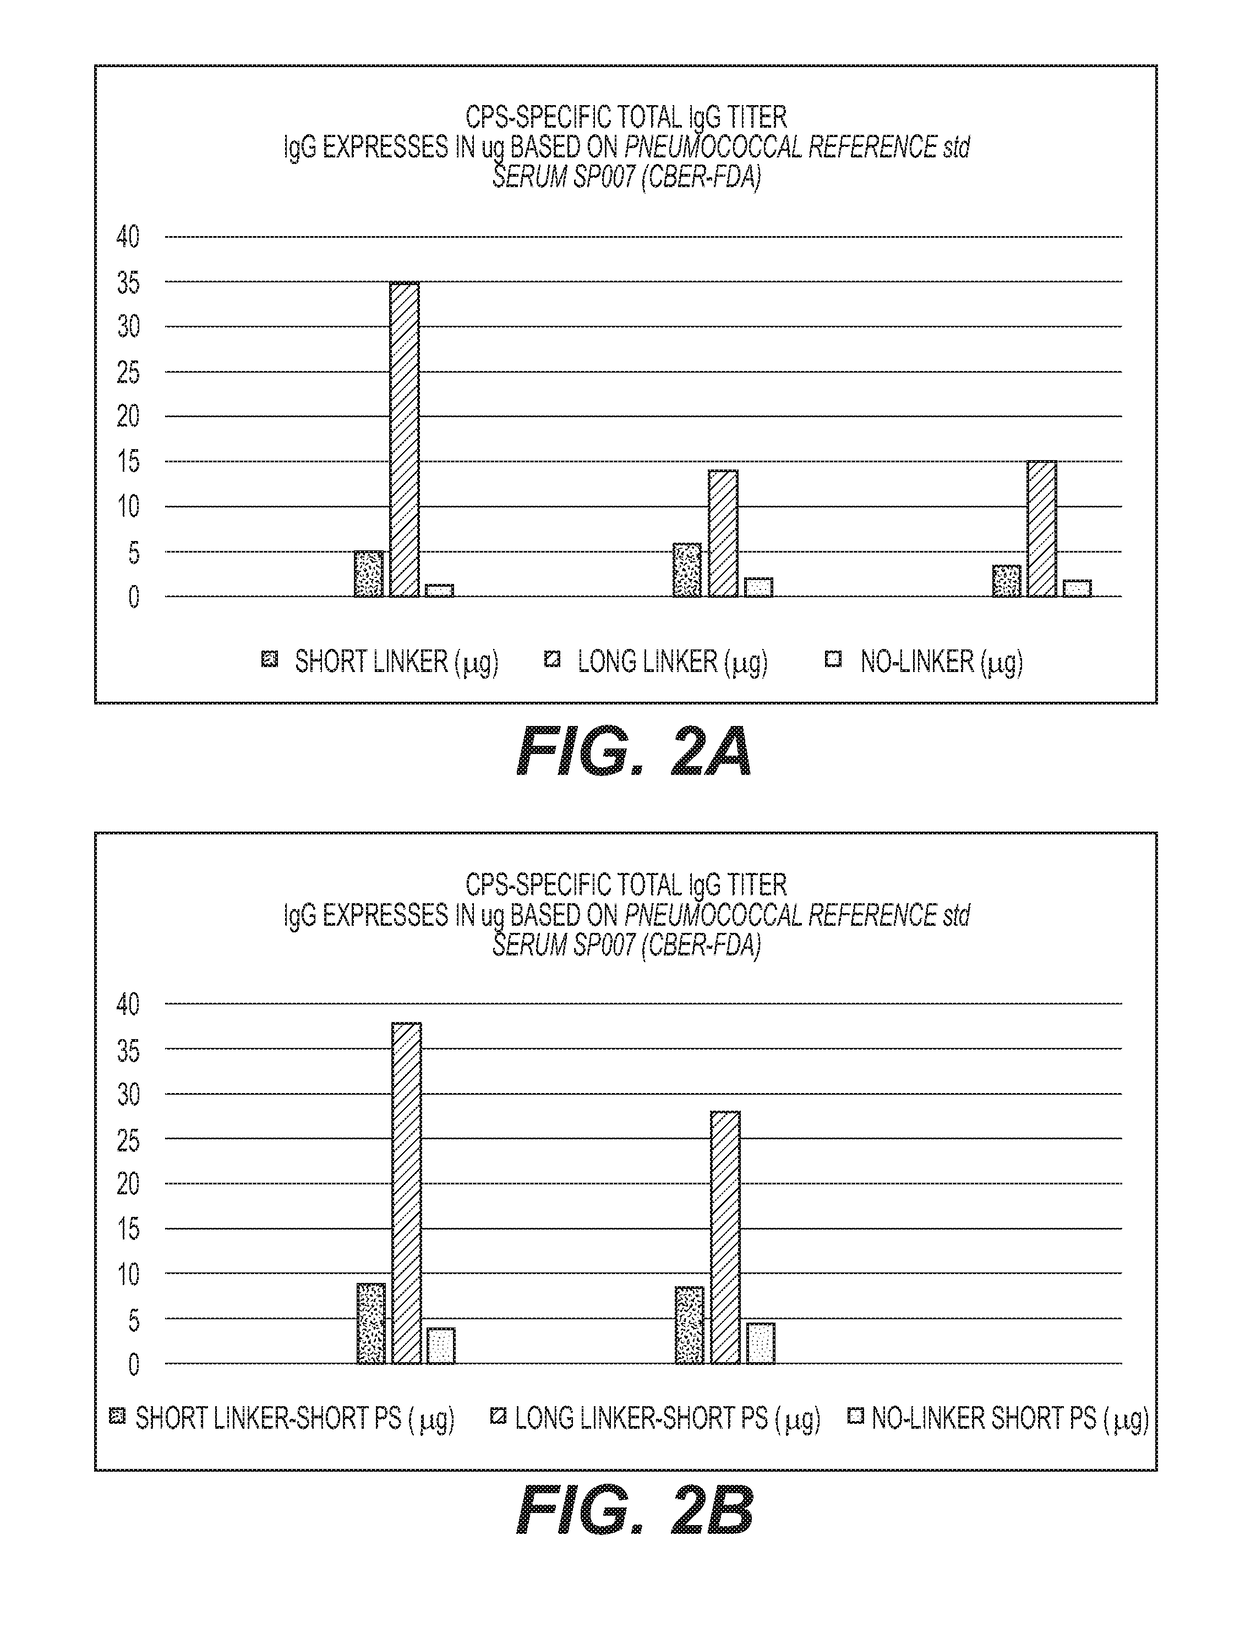 Multivalent Conjugate Vaccines with Bivalent or Multivalent Conjugate Polysaccharides that Provide Improved Immunogenicity and Avidity